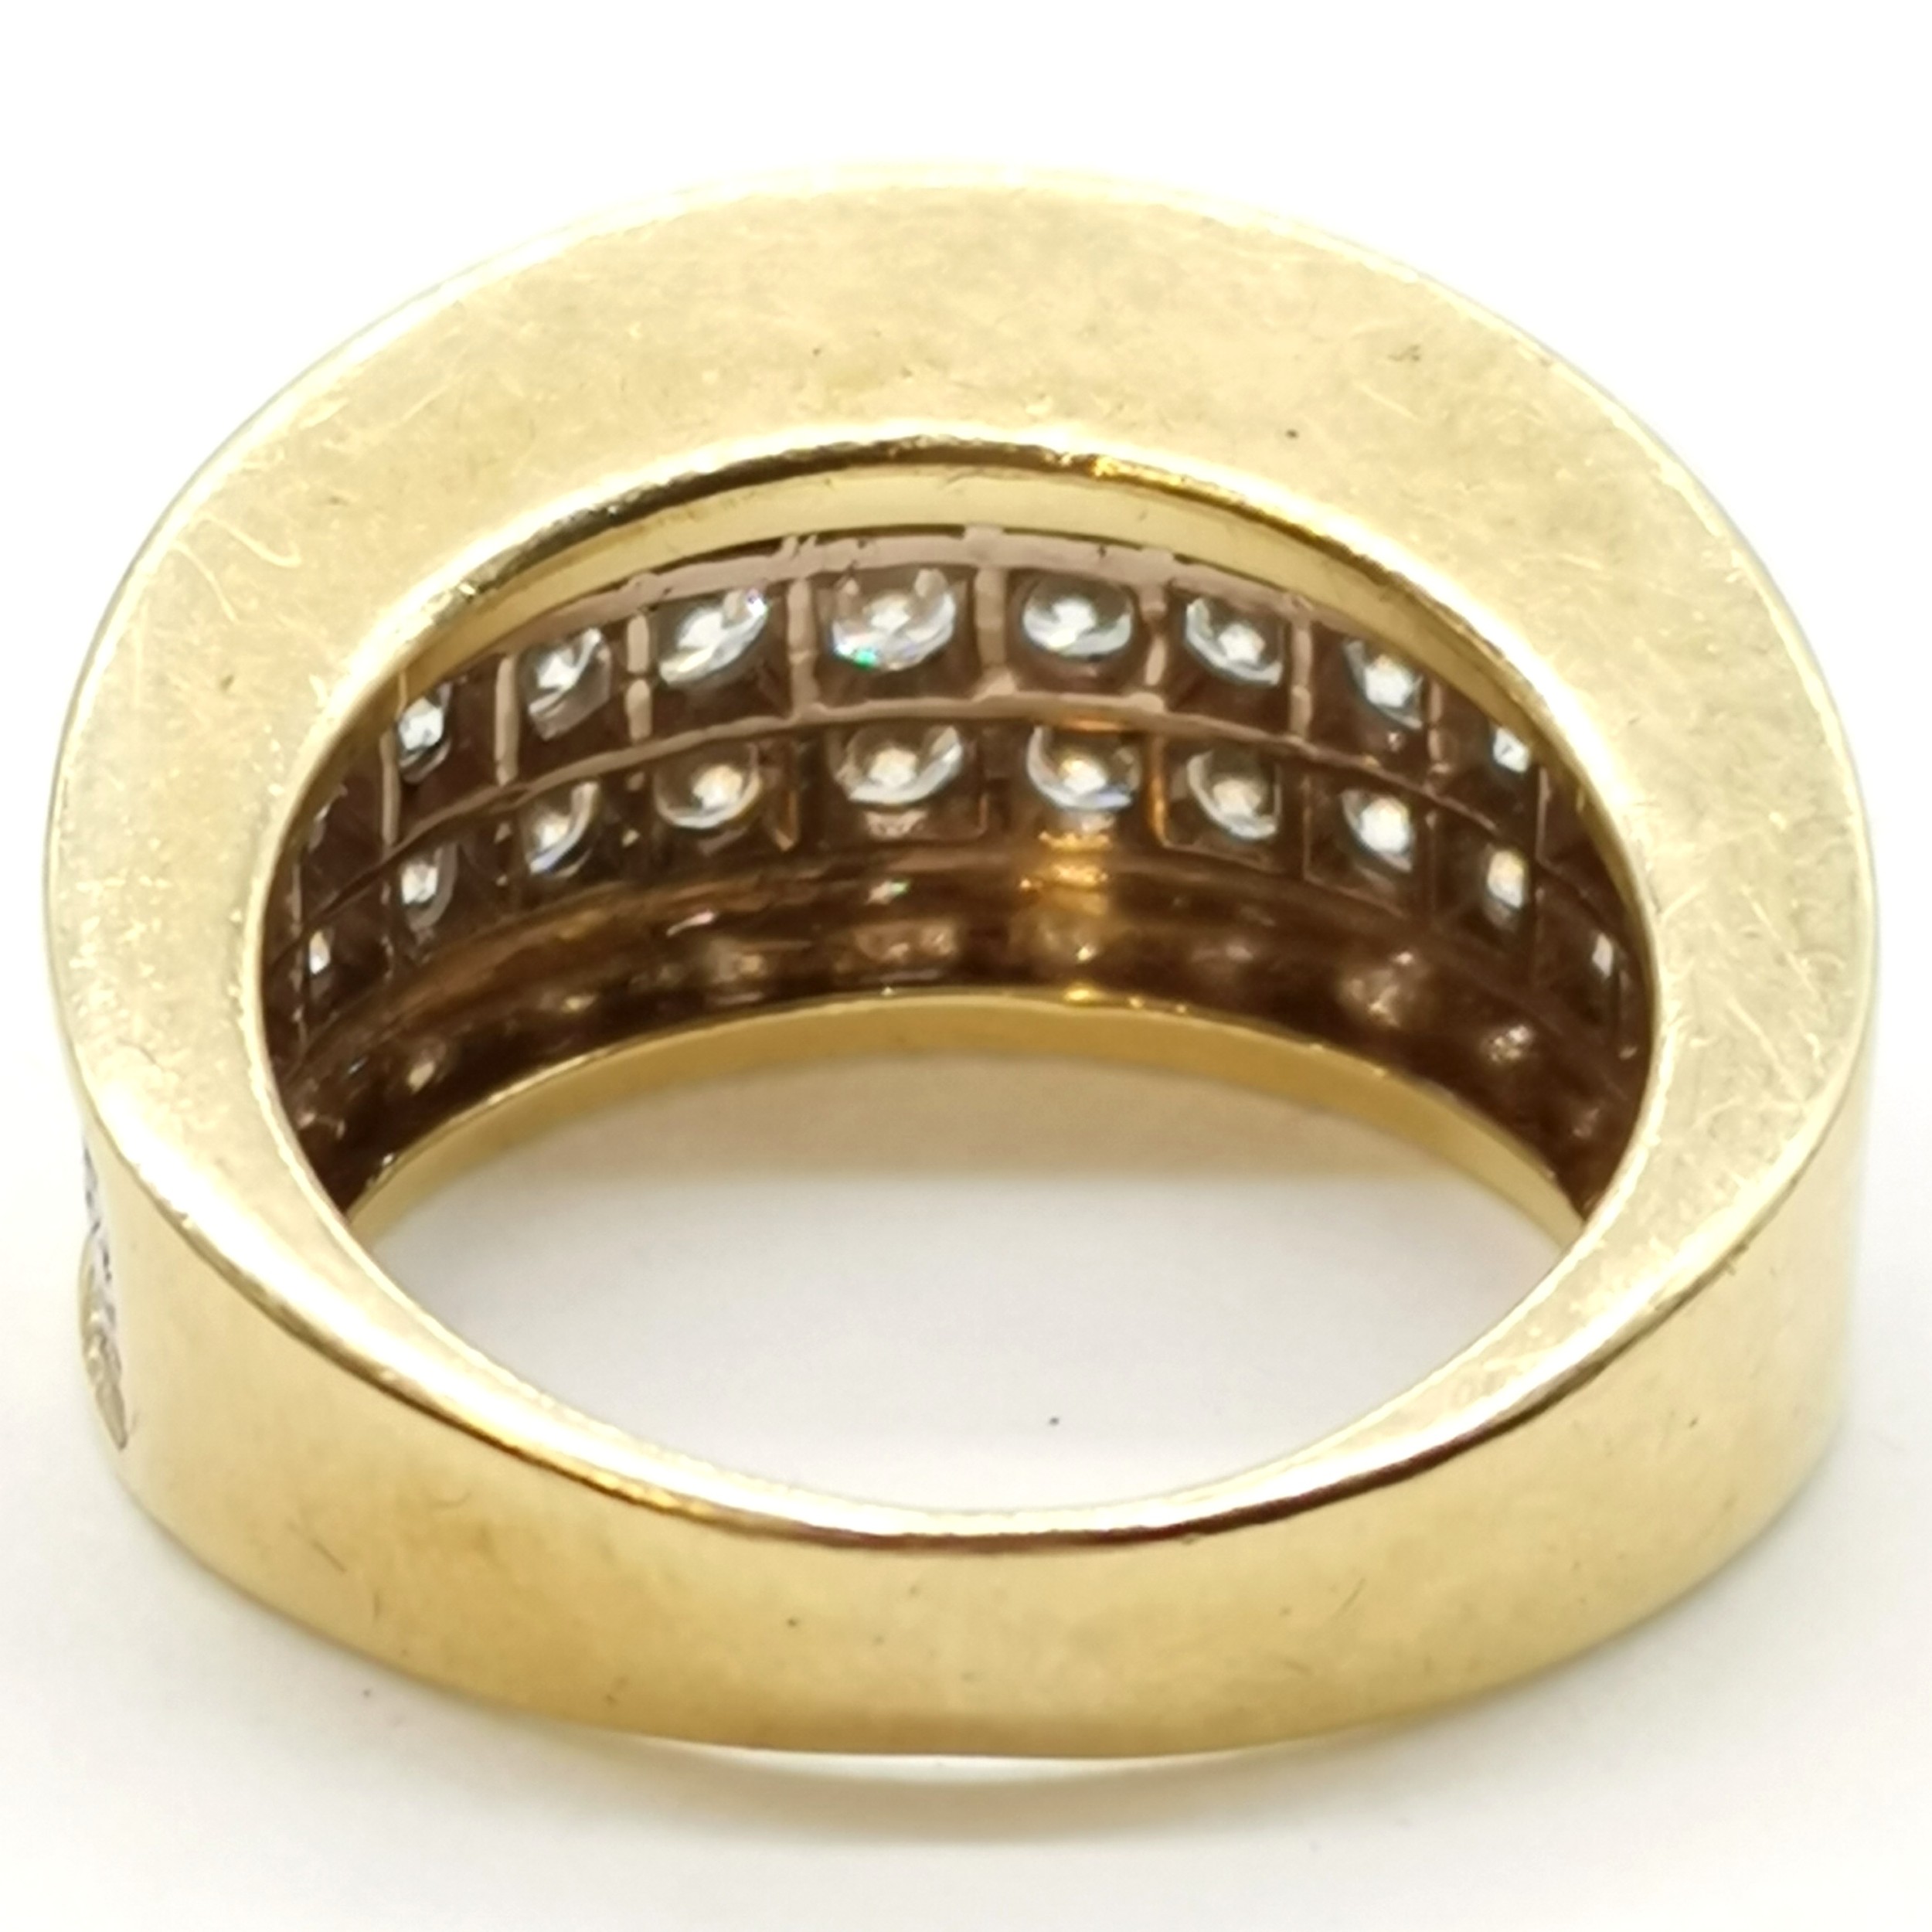 Impressive 18ct gold (unmarked) ring set with 47 diamonds in 3 rows - size L & 10.4g total weight - Image 2 of 3